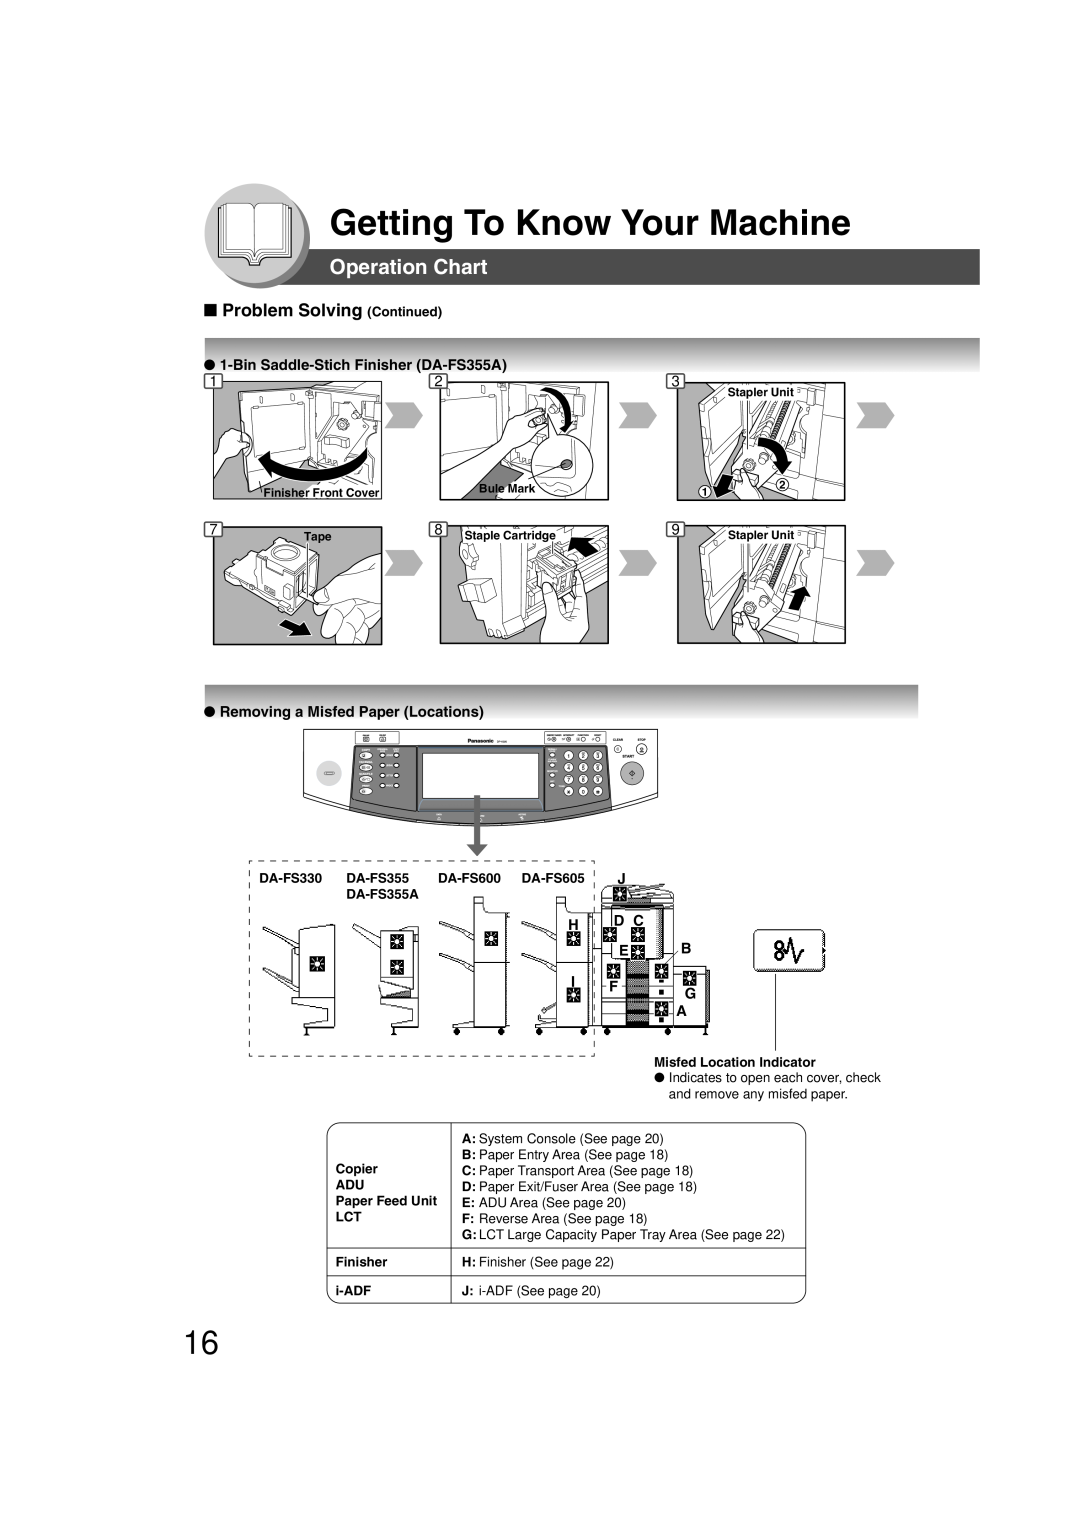 Panasonic 4520 Problem Solving Continued, Getting To Know Your Machine, Operation Chart, Removing a Misfed Paper Locations 